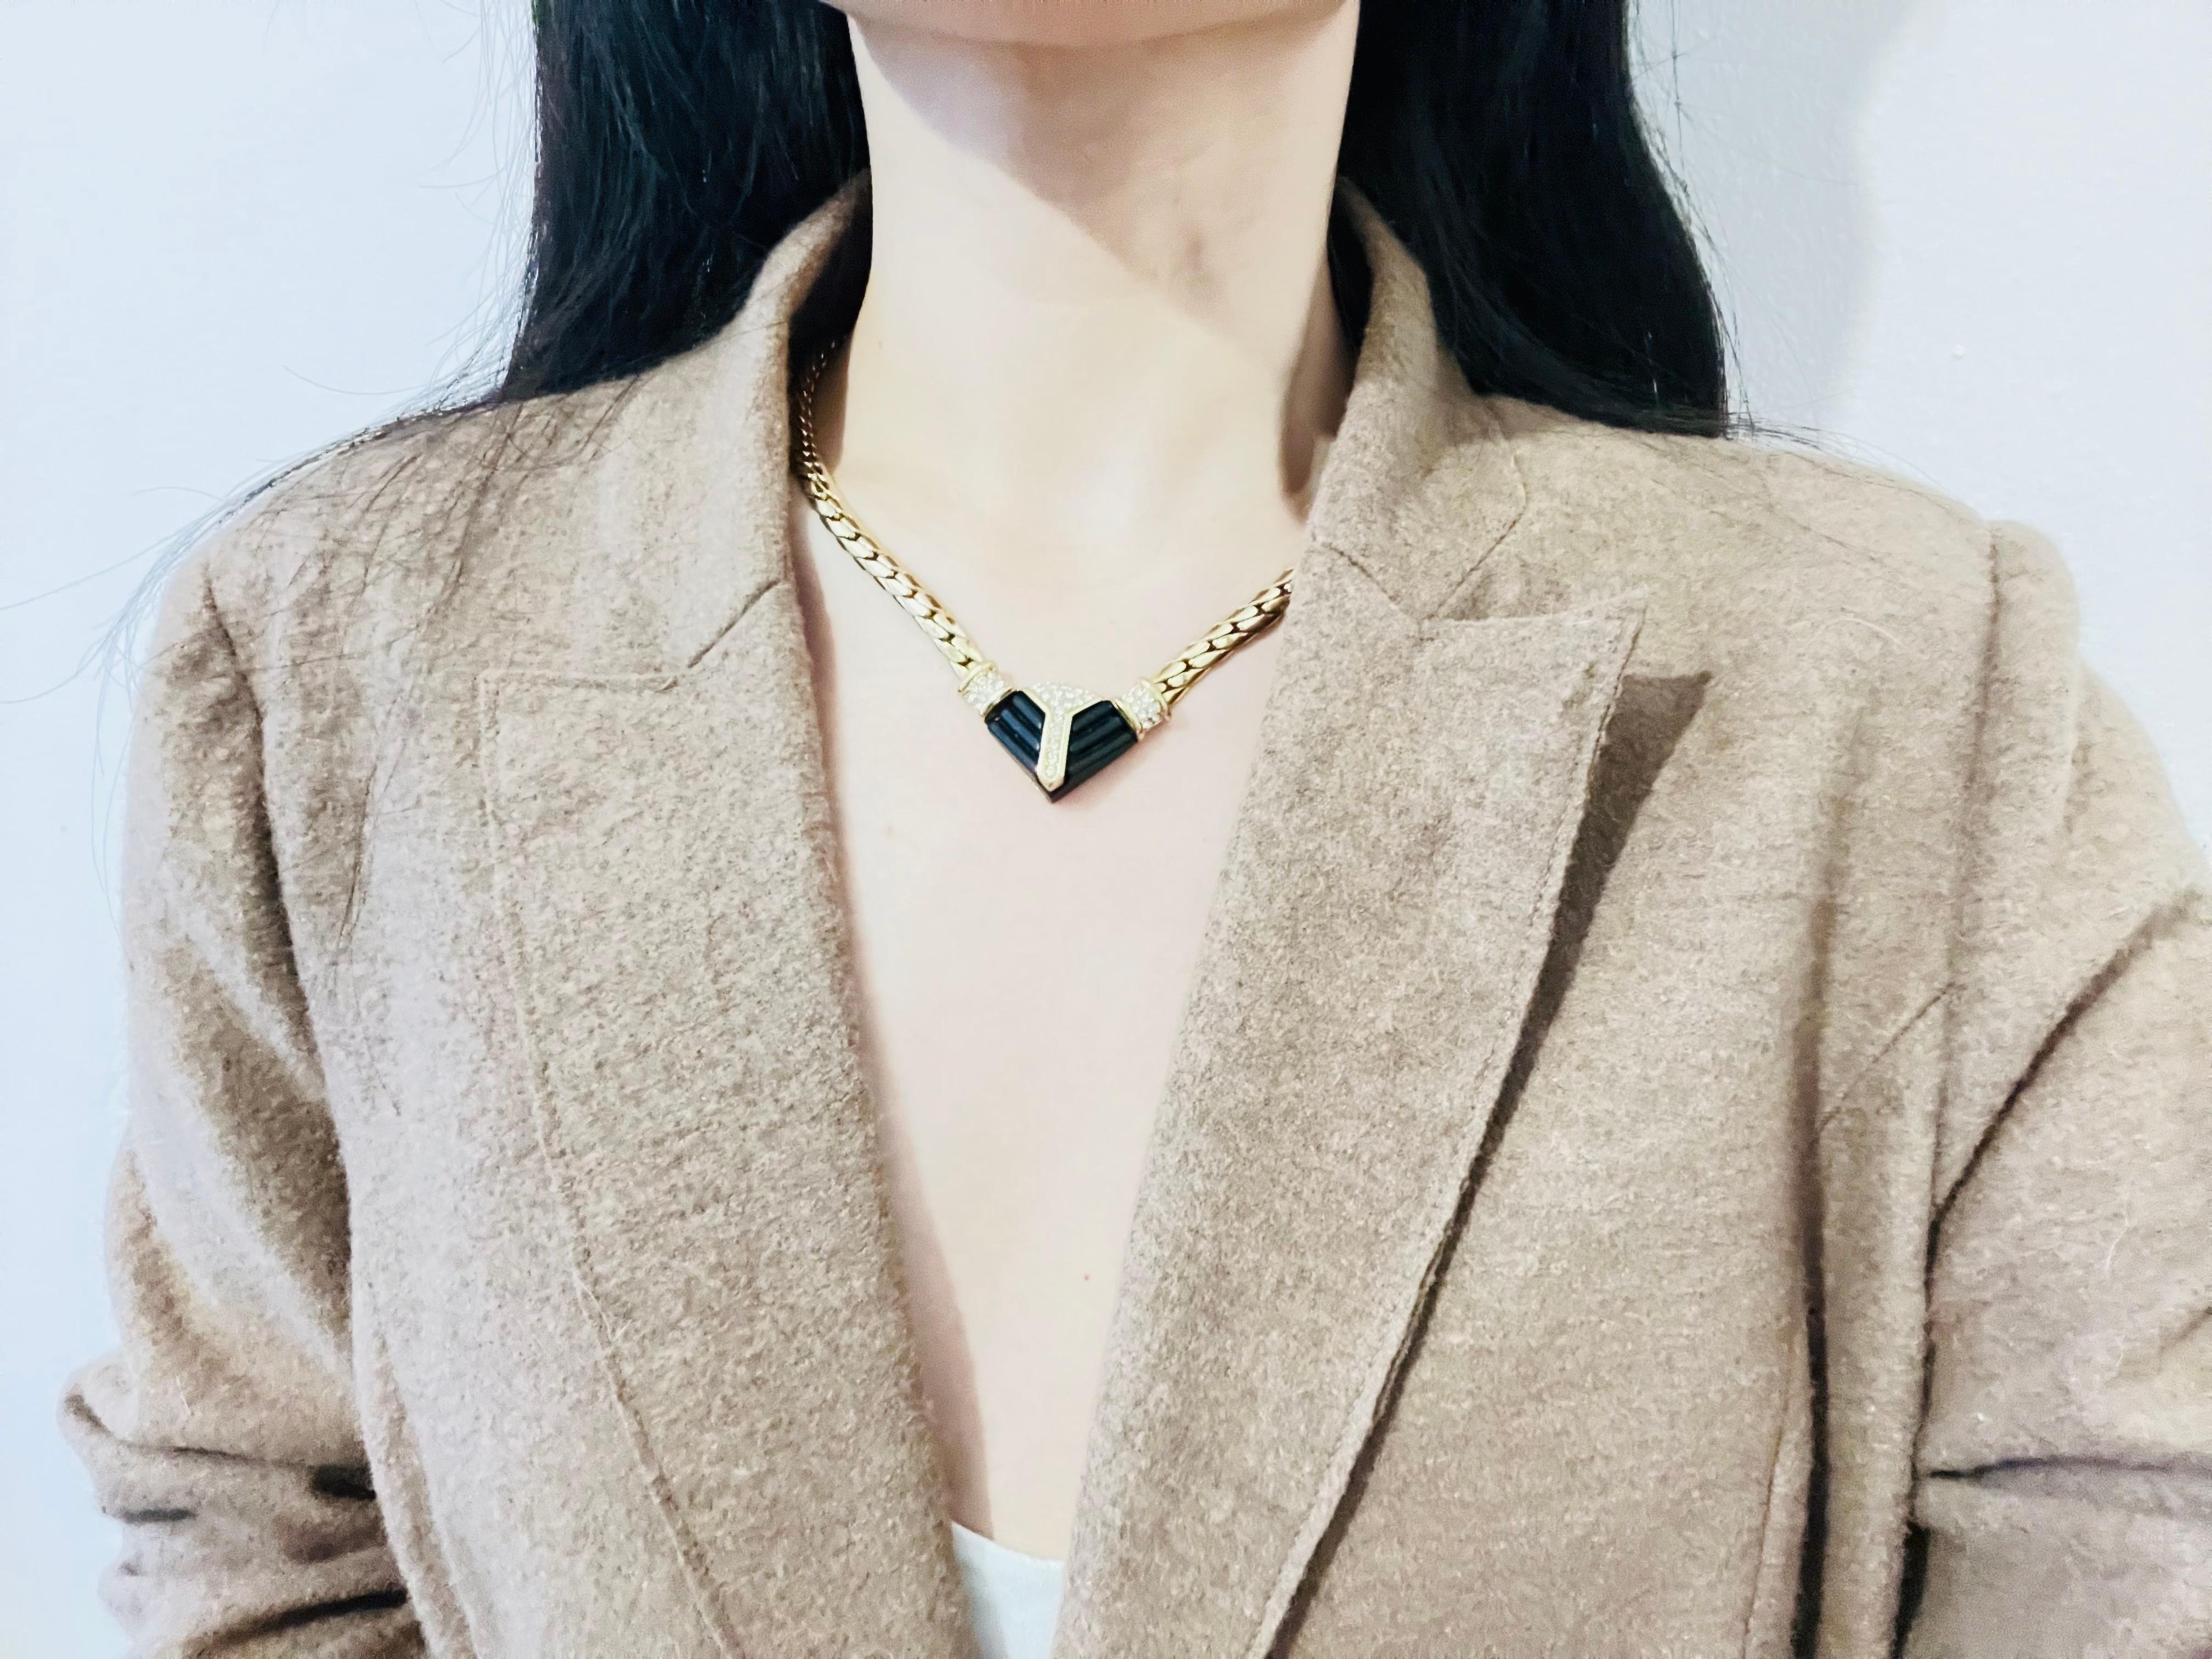 Christian Dior Vintage 1970s Crystals Black Triangle Chunky Pendant Necklace For Sale 1